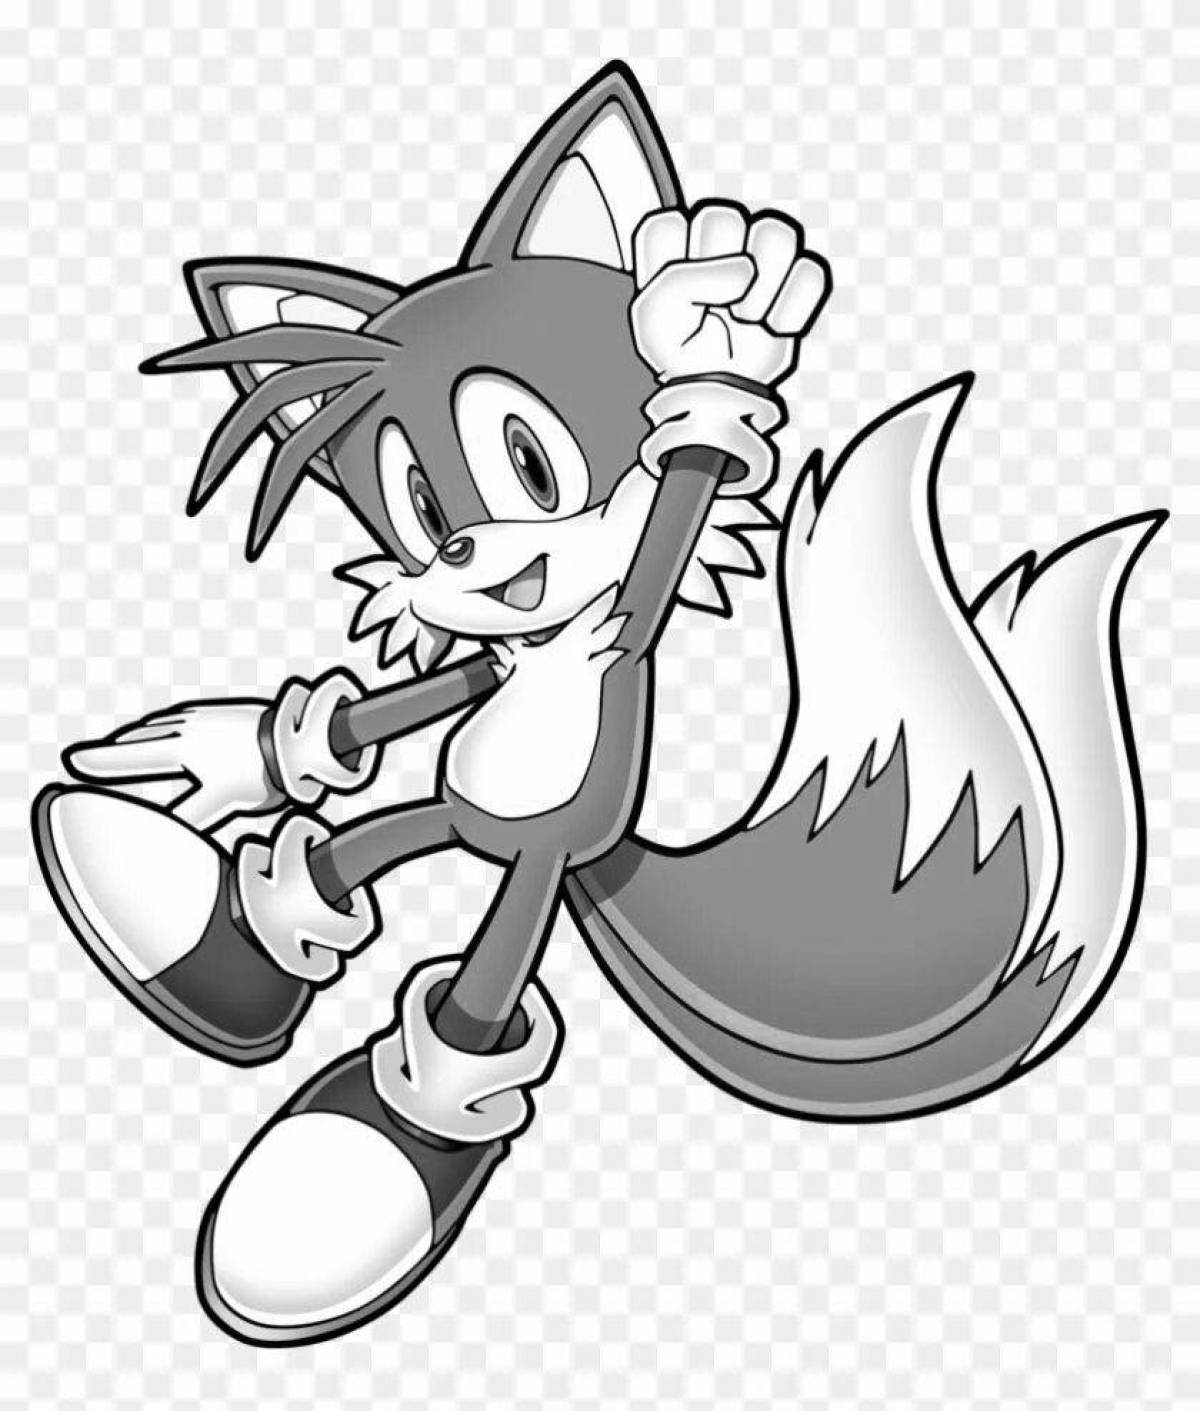 Coloring page tails